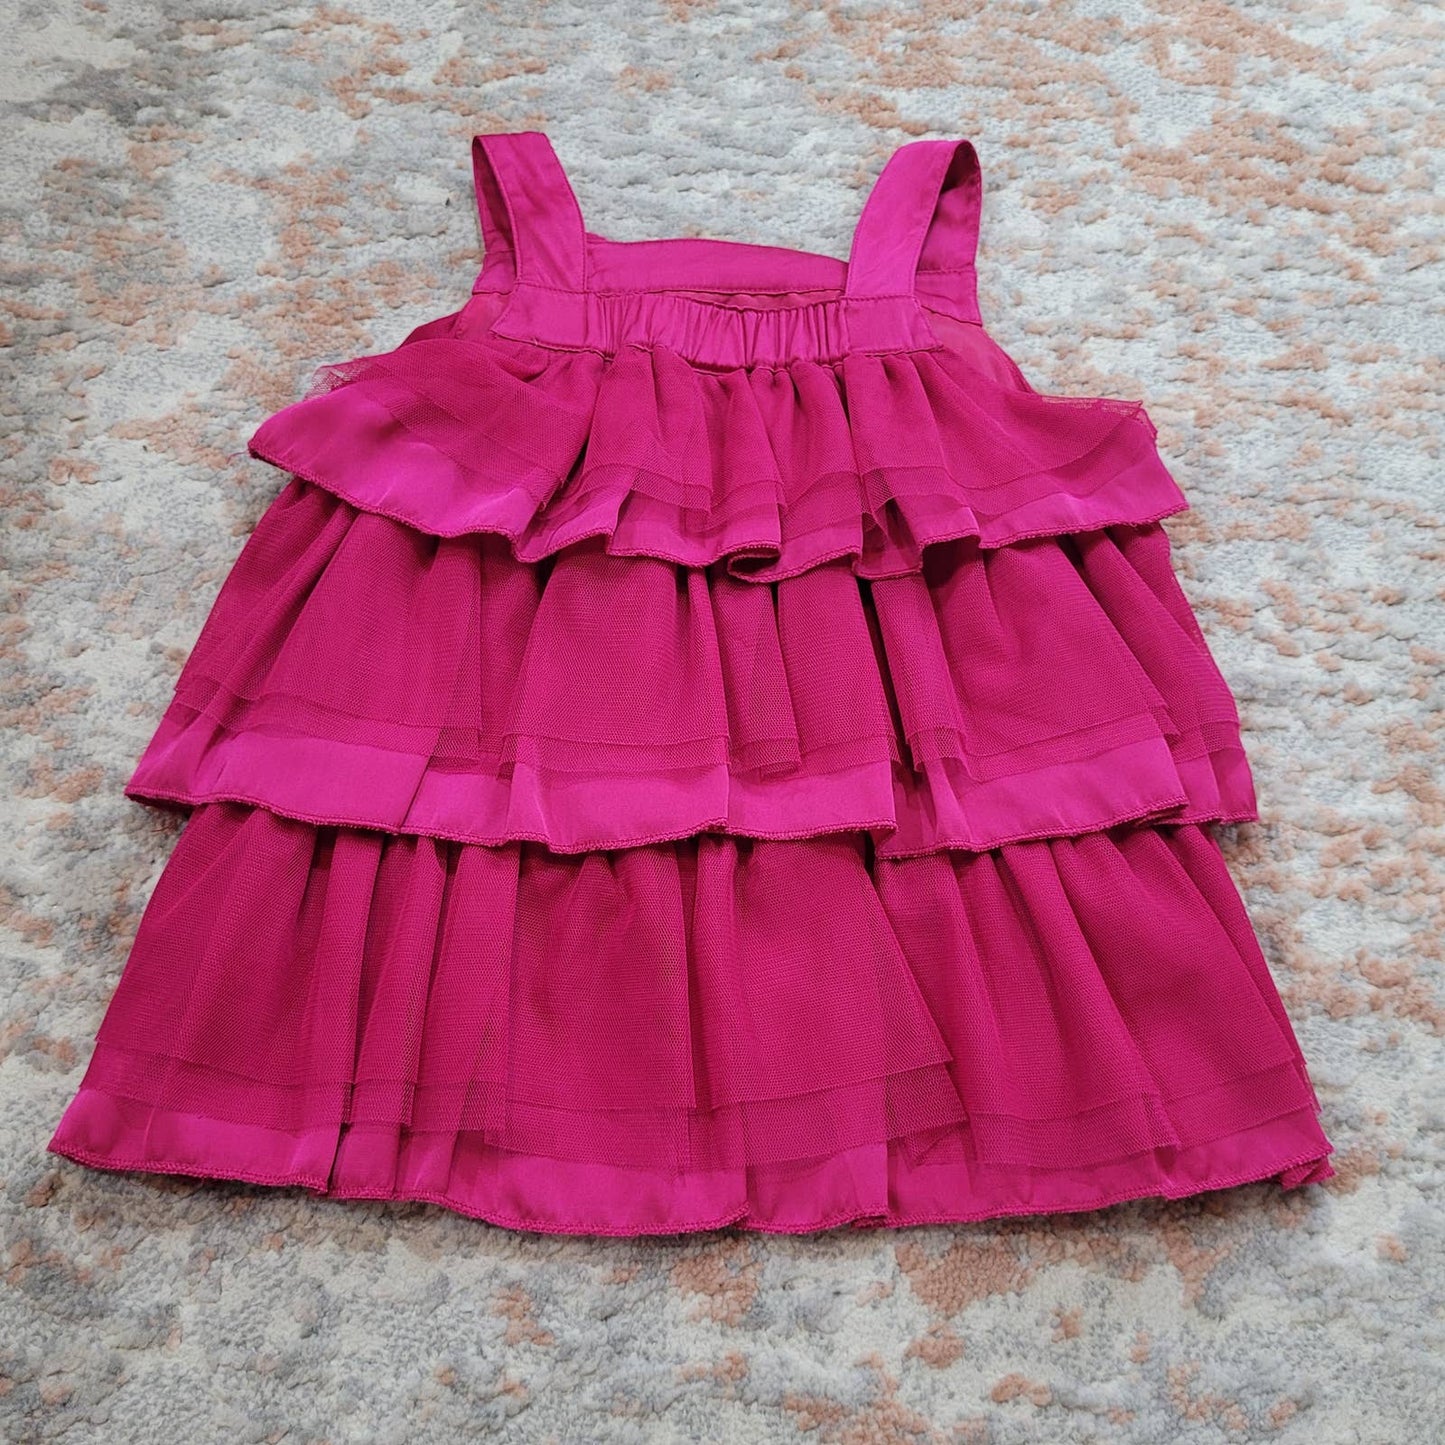 H&M Pink Tiered Ruffle Sleeveless Dress with Flower Accent - Size 7-8Y